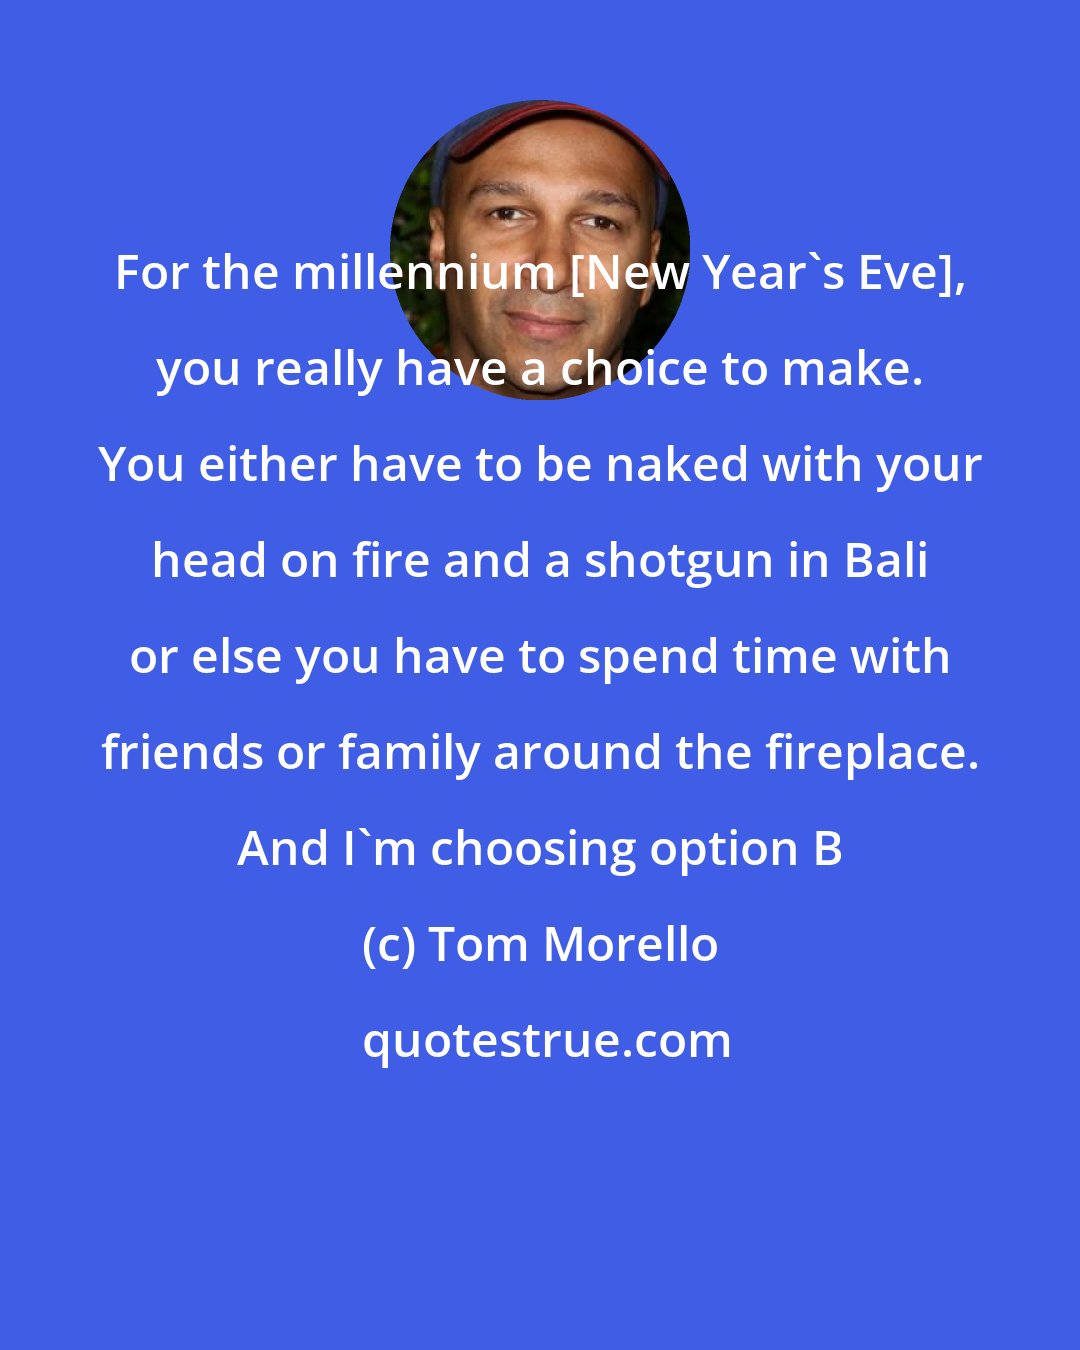 Tom Morello: For the millennium [New Year's Eve], you really have a choice to make. You either have to be naked with your head on fire and a shotgun in Bali or else you have to spend time with friends or family around the fireplace. And I'm choosing option B